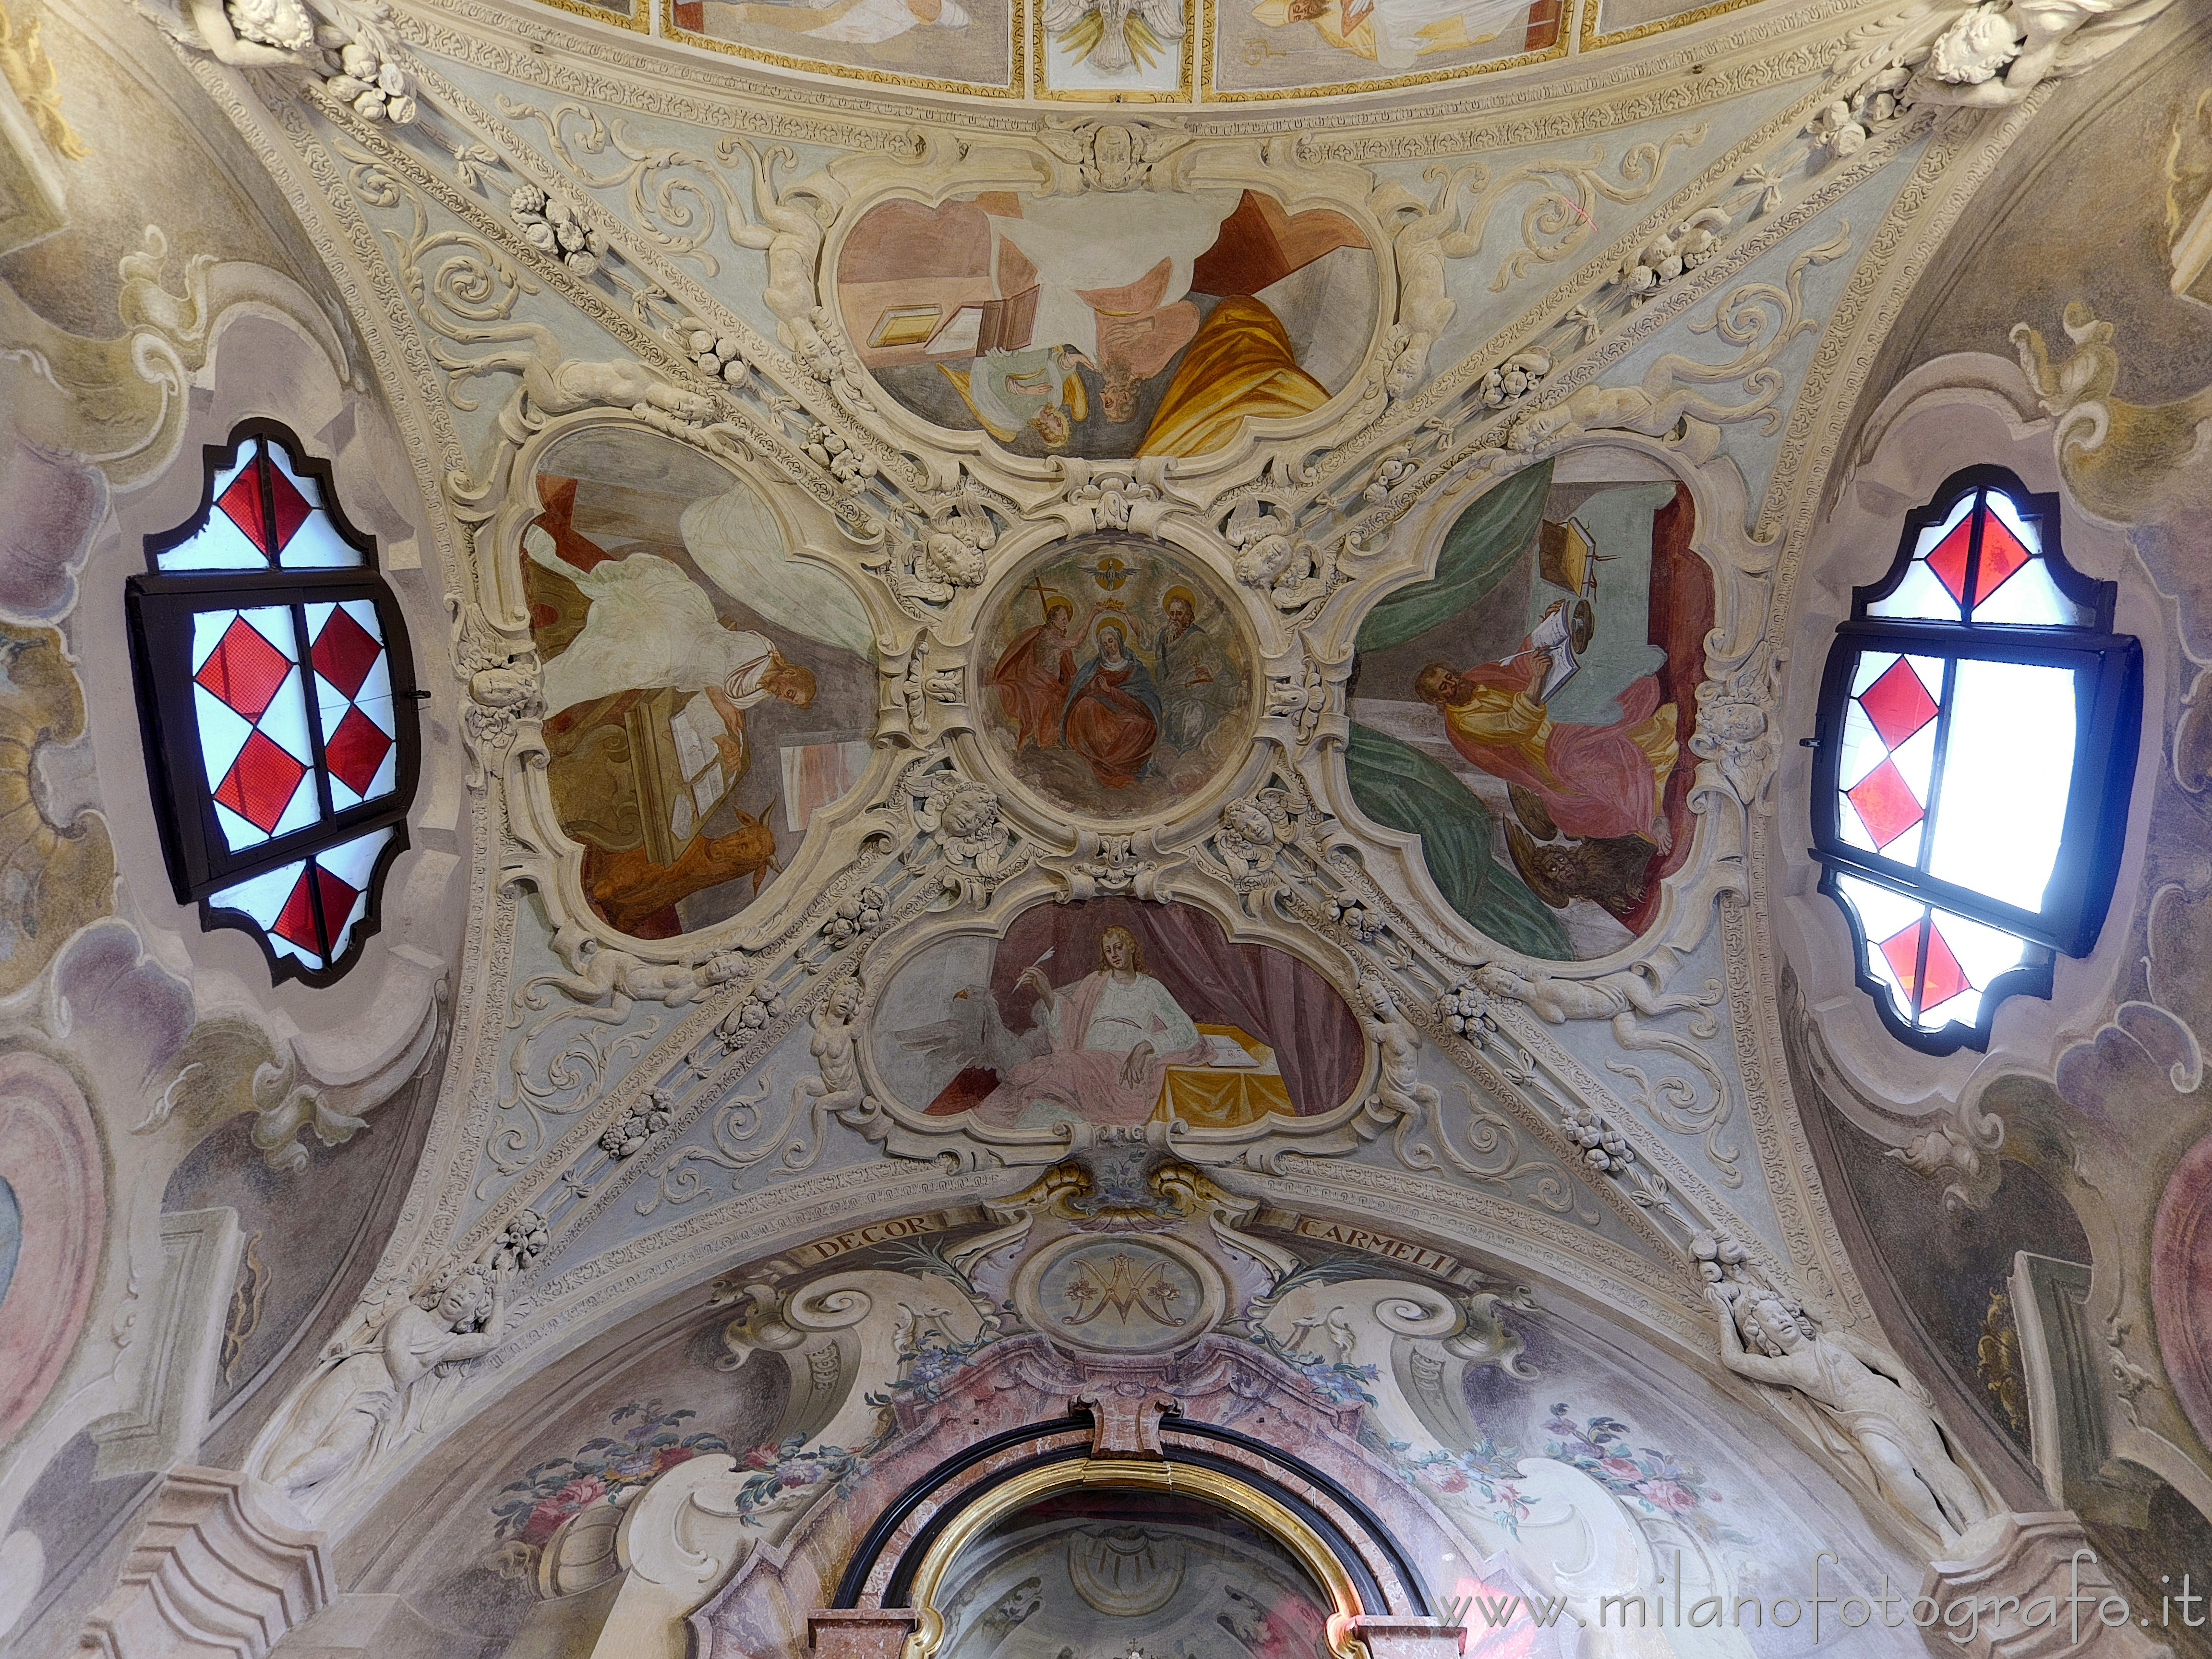 Oggiono (Lecco, Italy): Vault of the apse of the Church of Sant'Agata - Oggiono (Lecco, Italy)